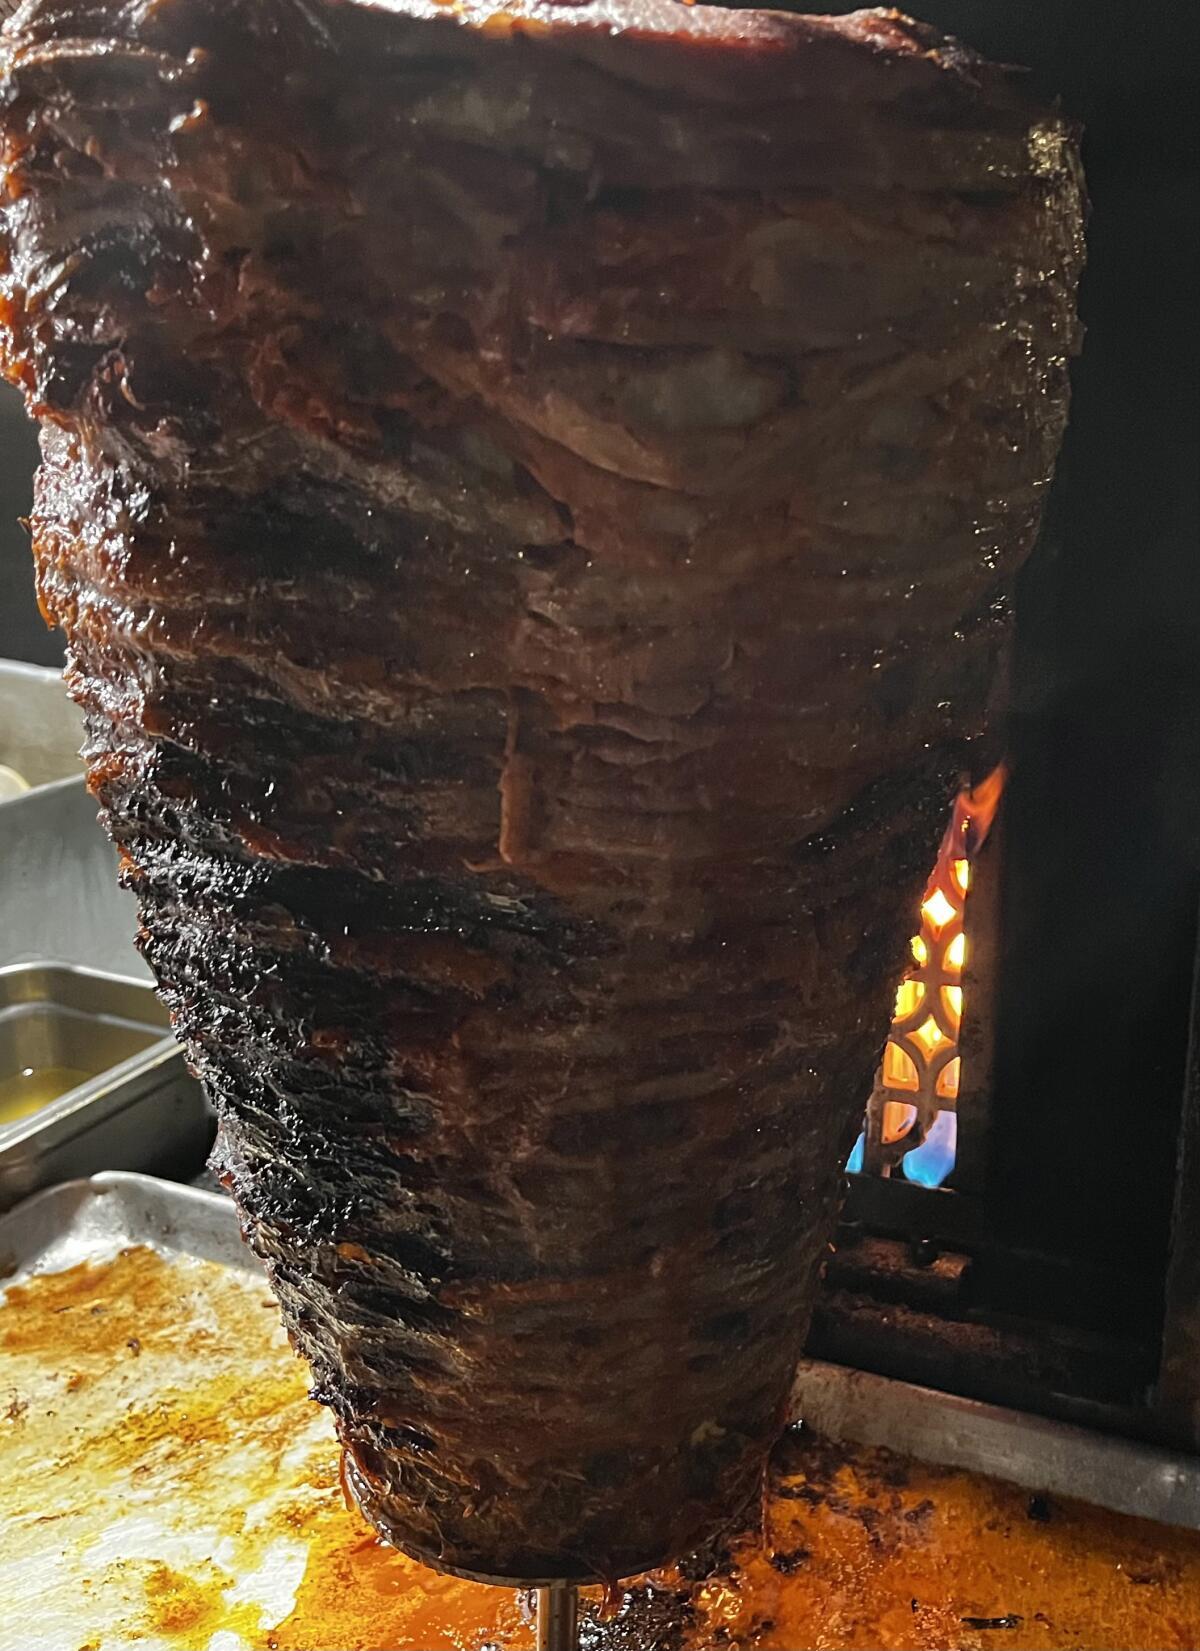 A flame keeps an al pastor spit warm and ready for tacos at an undisclosed and unpermitted taco stand in Anaheim.